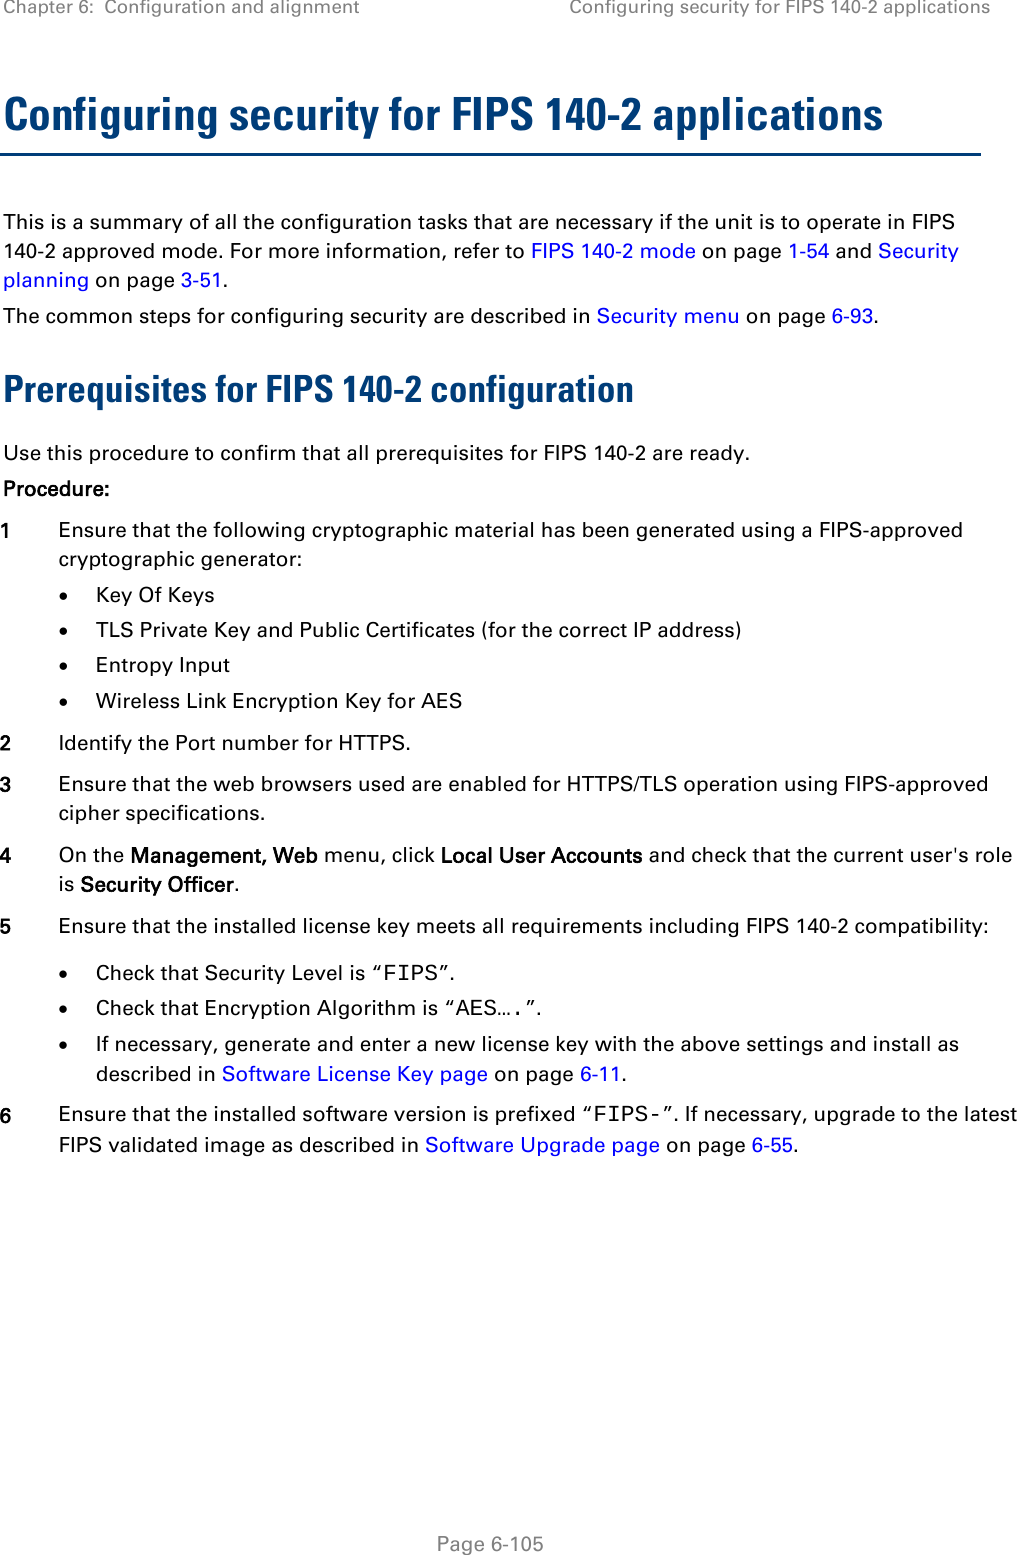 Chapter 6:  Configuration and alignment Configuring security for FIPS 140-2 applications  Configuring security for FIPS 140-2 applications This is a summary of all the configuration tasks that are necessary if the unit is to operate in FIPS 140-2 approved mode. For more information, refer to FIPS 140-2 mode on page 1-54 and Security planning on page 3-51. The common steps for configuring security are described in Security menu on page 6-93. Prerequisites for FIPS 140-2 configuration Use this procedure to confirm that all prerequisites for FIPS 140-2 are ready. Procedure: 1 Ensure that the following cryptographic material has been generated using a FIPS-approved cryptographic generator: • Key Of Keys • TLS Private Key and Public Certificates (for the correct IP address) • Entropy Input • Wireless Link Encryption Key for AES 2 Identify the Port number for HTTPS. 3 Ensure that the web browsers used are enabled for HTTPS/TLS operation using FIPS-approved cipher specifications. 4 On the Management, Web menu, click Local User Accounts and check that the current user&apos;s role is Security Officer. 5 Ensure that the installed license key meets all requirements including FIPS 140-2 compatibility: • Check that Security Level is “FIPS”. • Check that Encryption Algorithm is “AES….”. • If necessary, generate and enter a new license key with the above settings and install as described in Software License Key page on page 6-11. 6 Ensure that the installed software version is prefixed “FIPS-”. If necessary, upgrade to the latest FIPS validated image as described in Software Upgrade page on page 6-55.  Page 6-105 